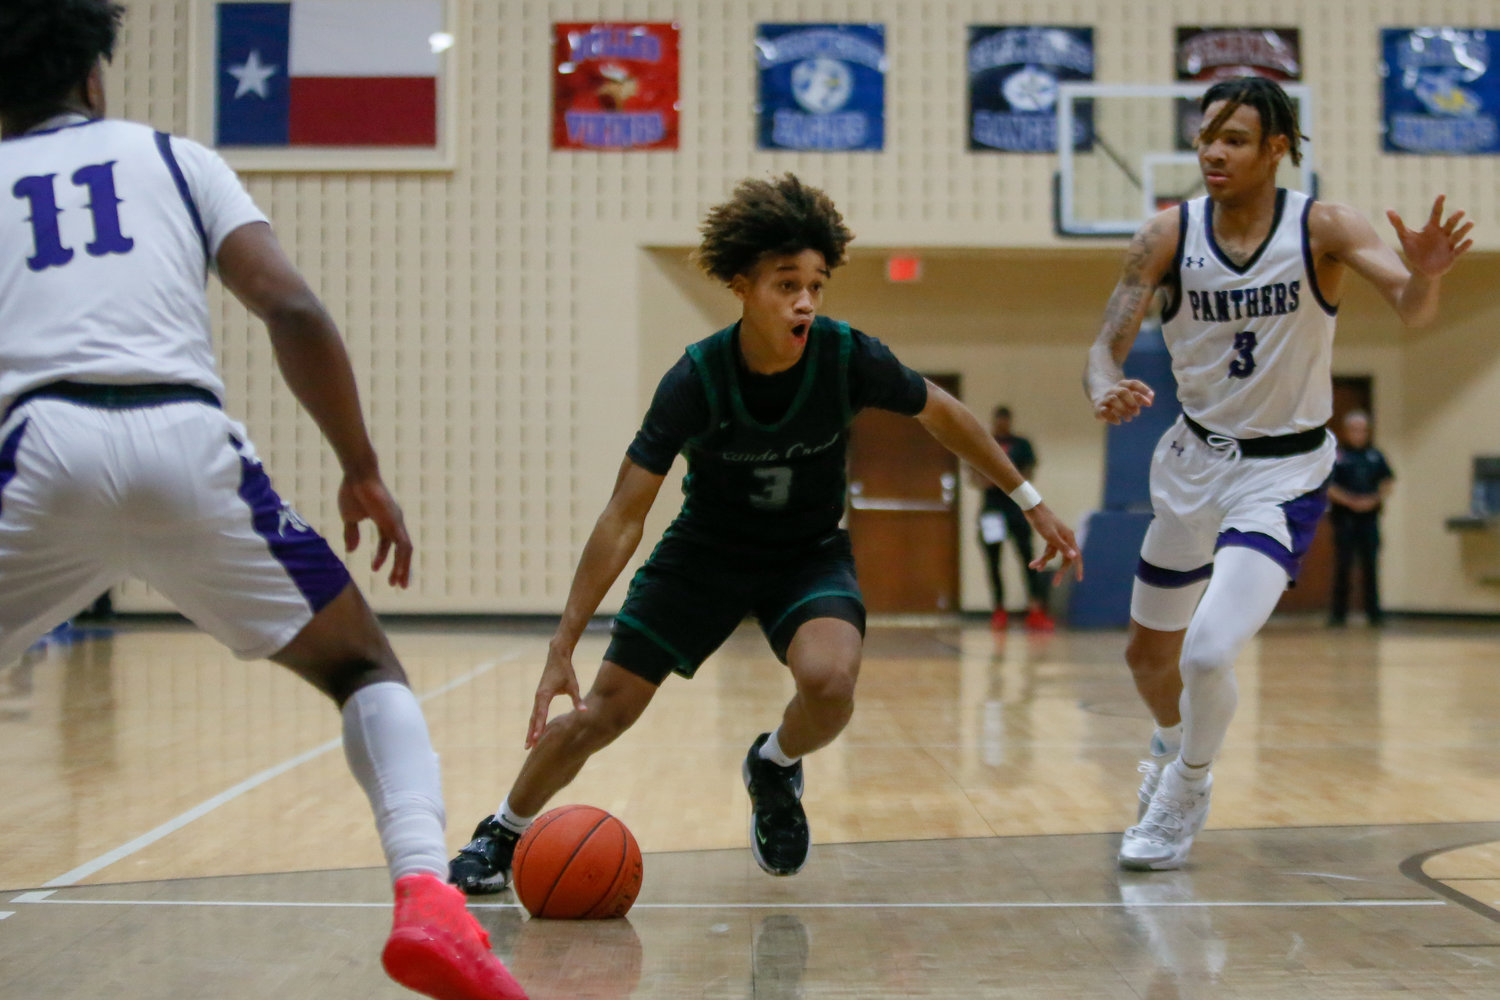 Christian Jones drives to the basket during Tuesday's game against Ridge Point.